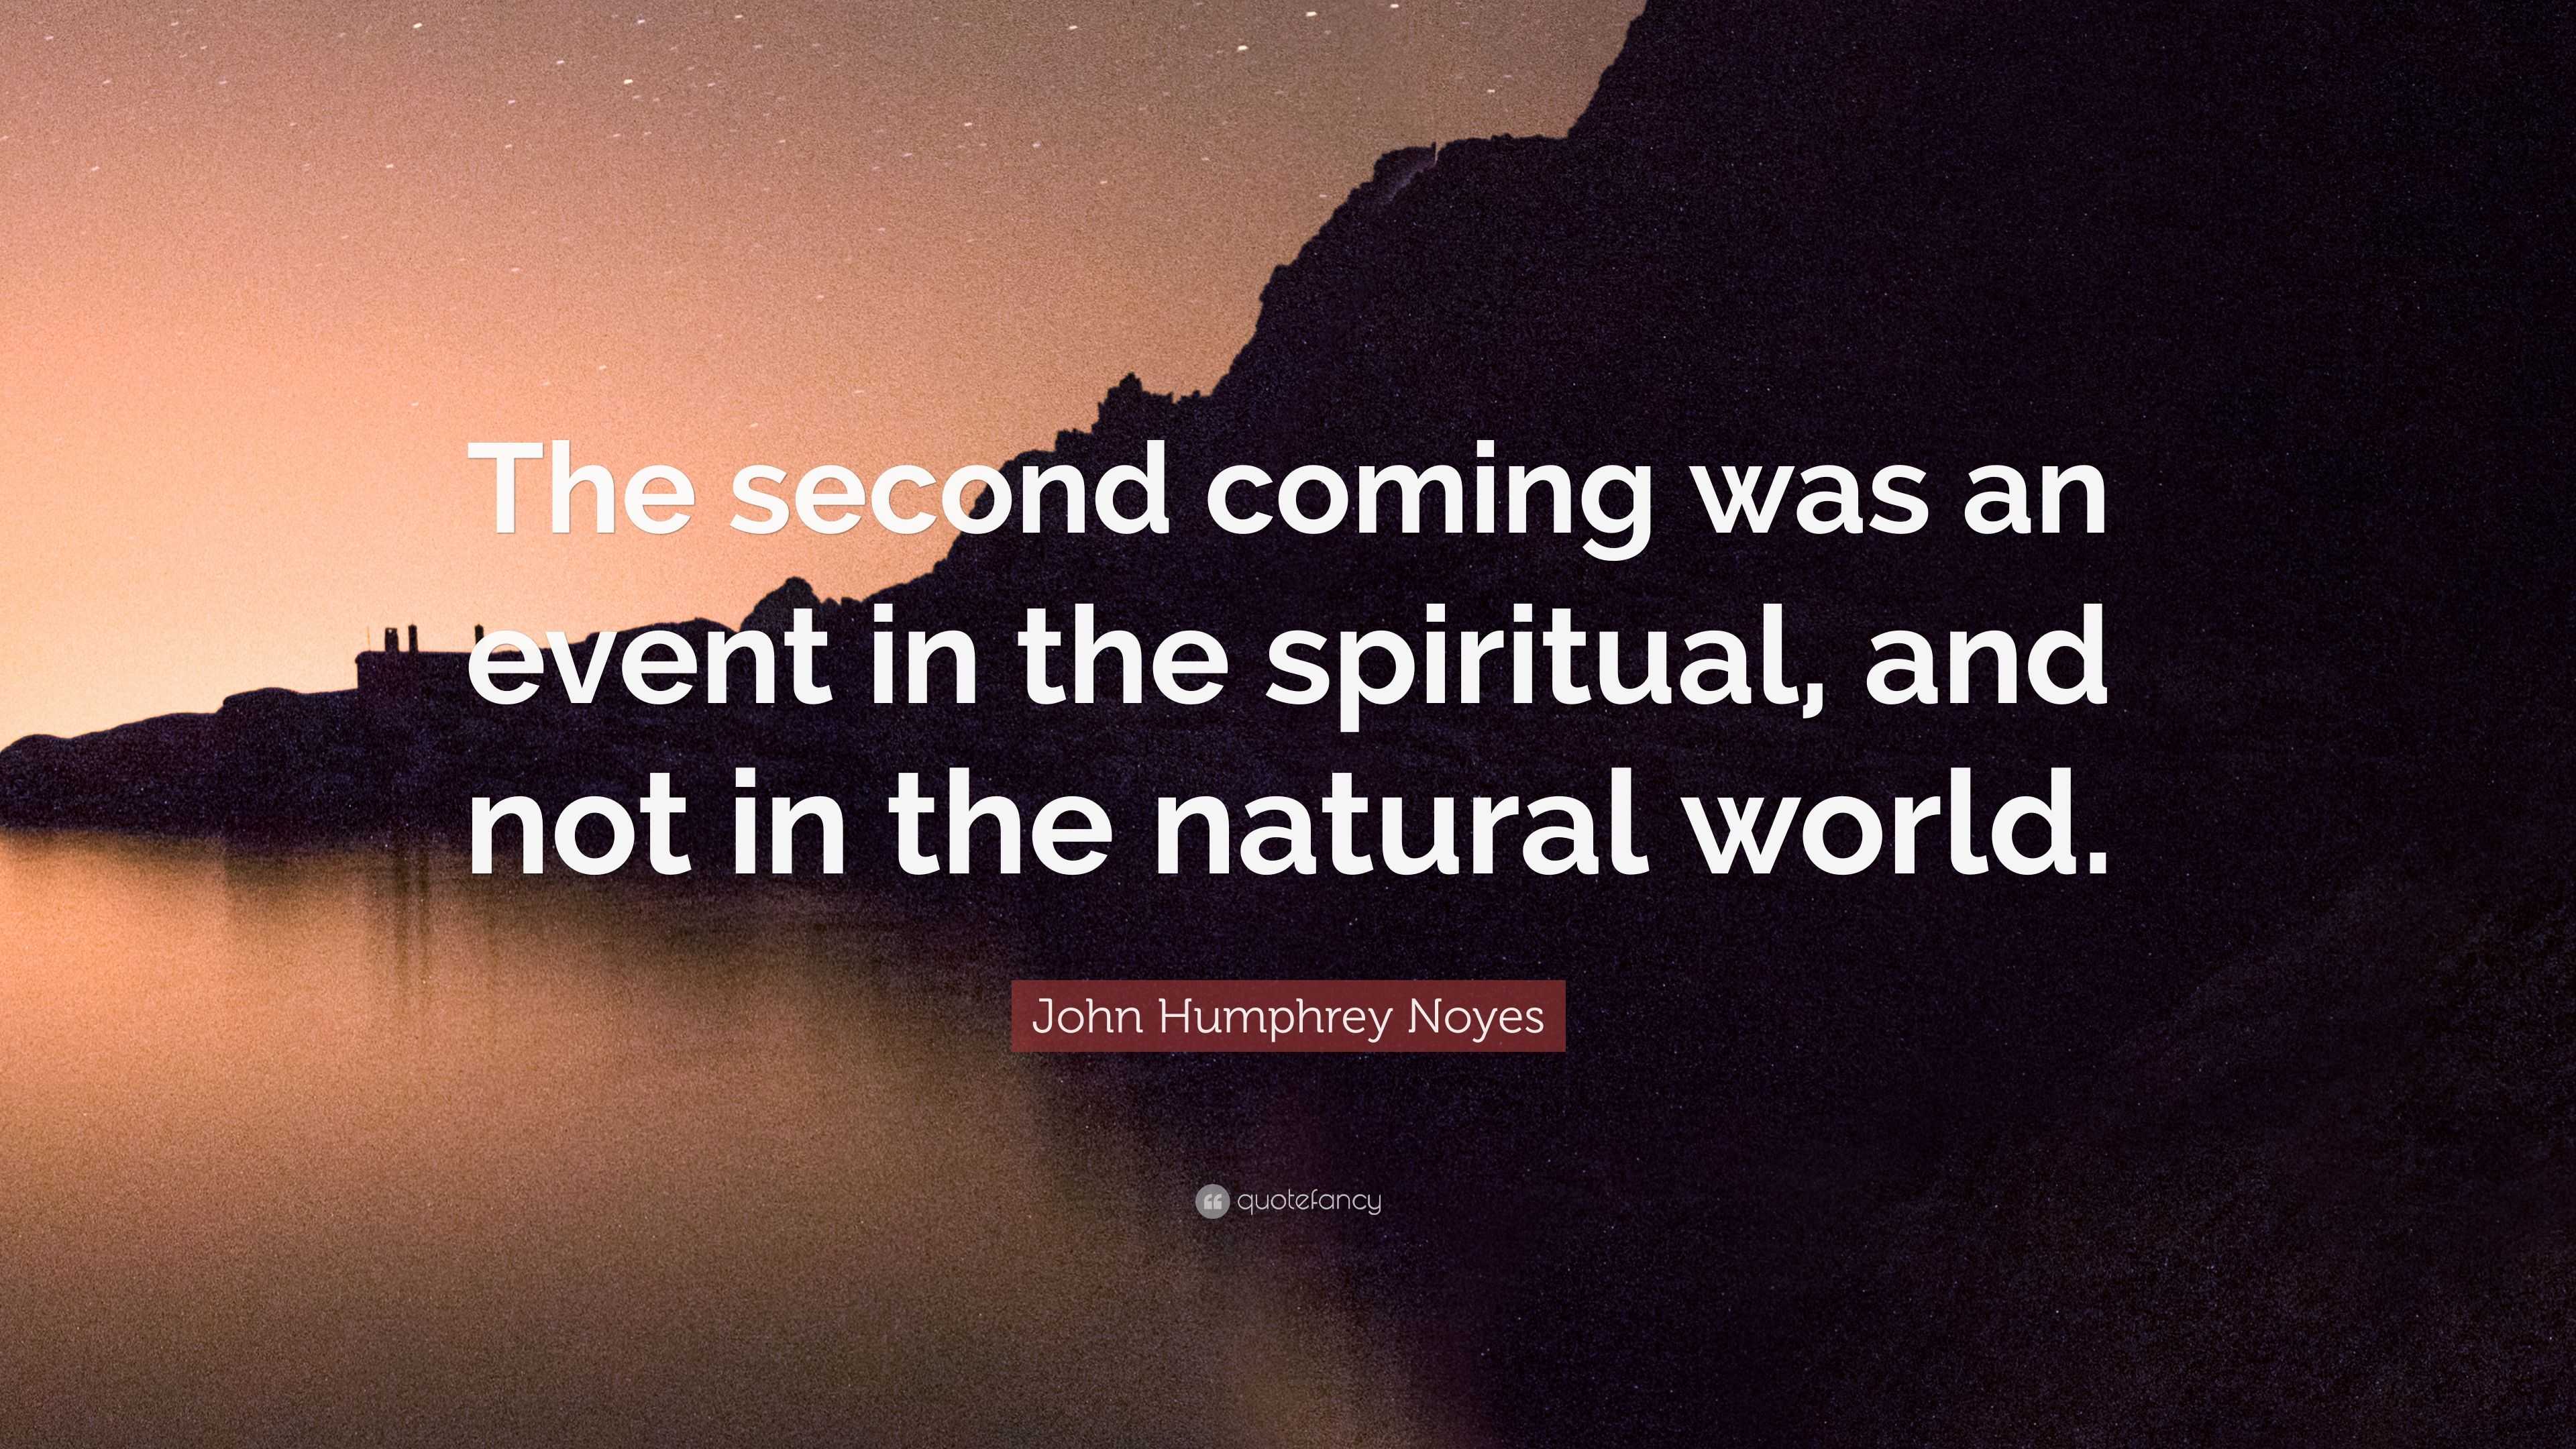 John Humphrey Noyes Quote: “The second coming was an event in the ...